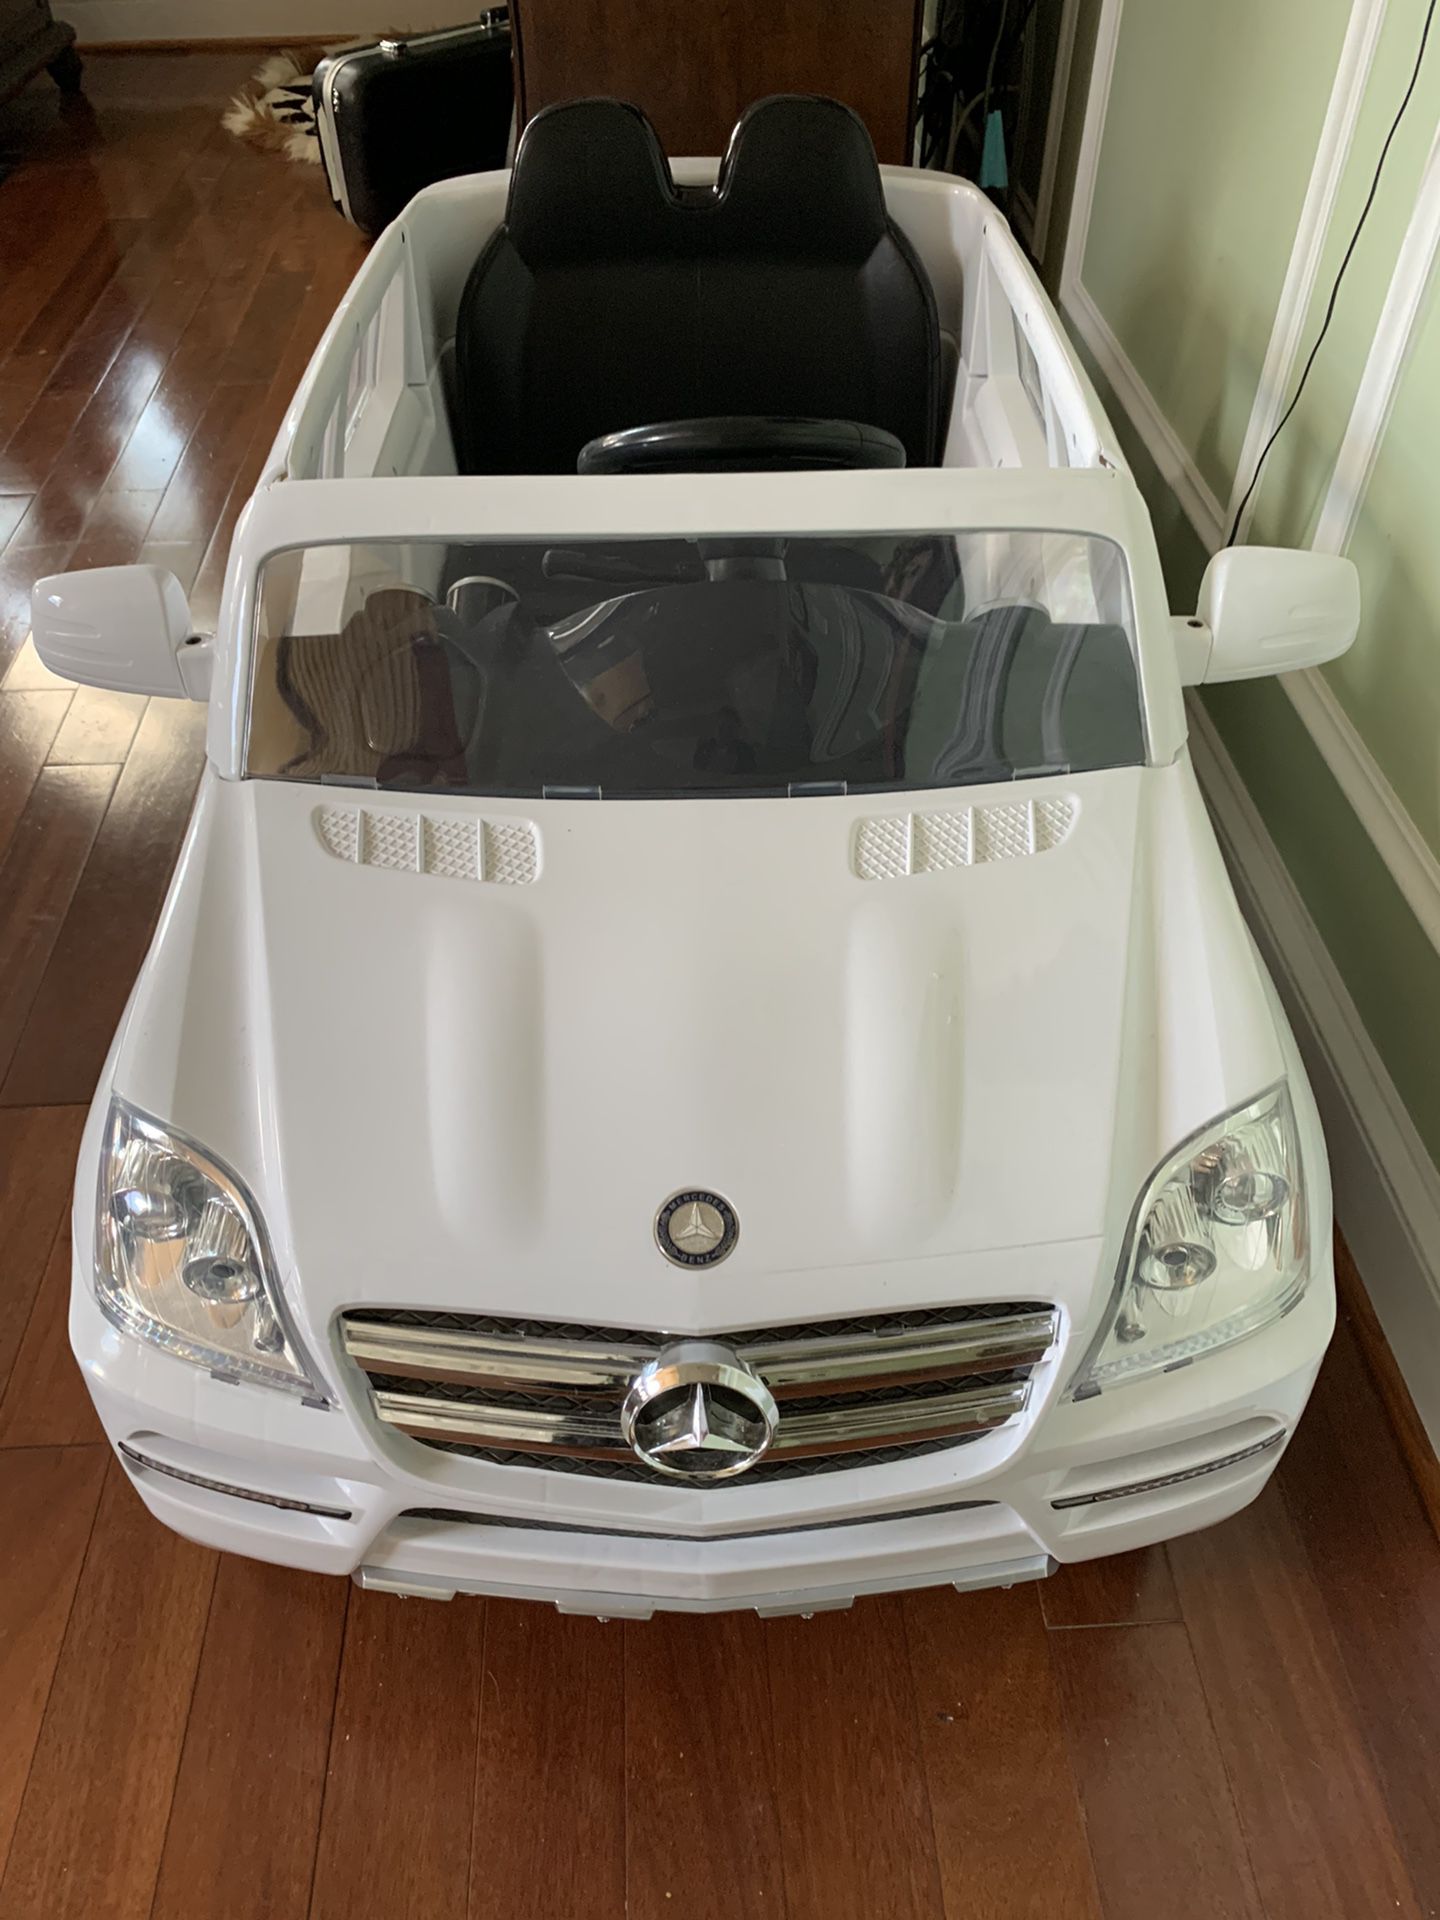 Rollplay 6V Mercedes Benz Powered Ride On For Kids 